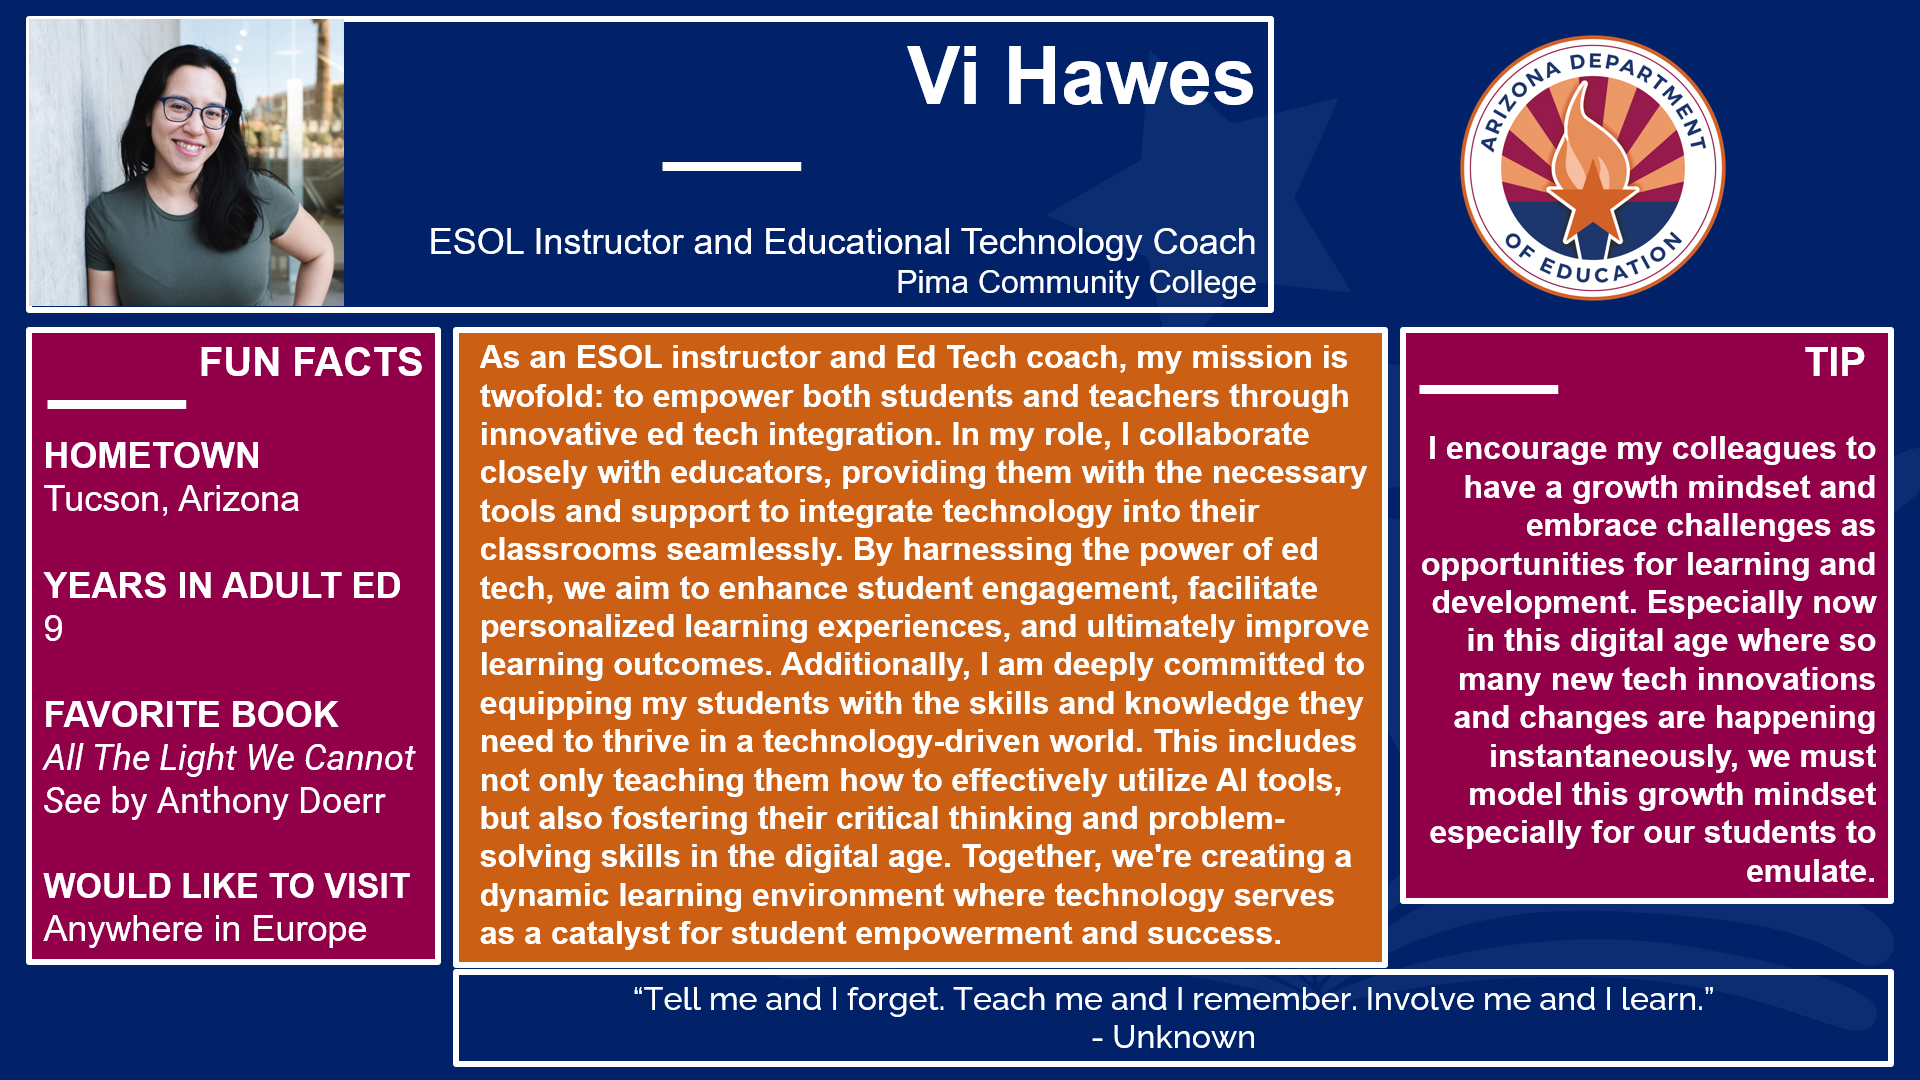 Teacher spotlight for Vi Hawes. Reach out to the Teaching and Learning Team for more information at AESTandL@azed.gov.